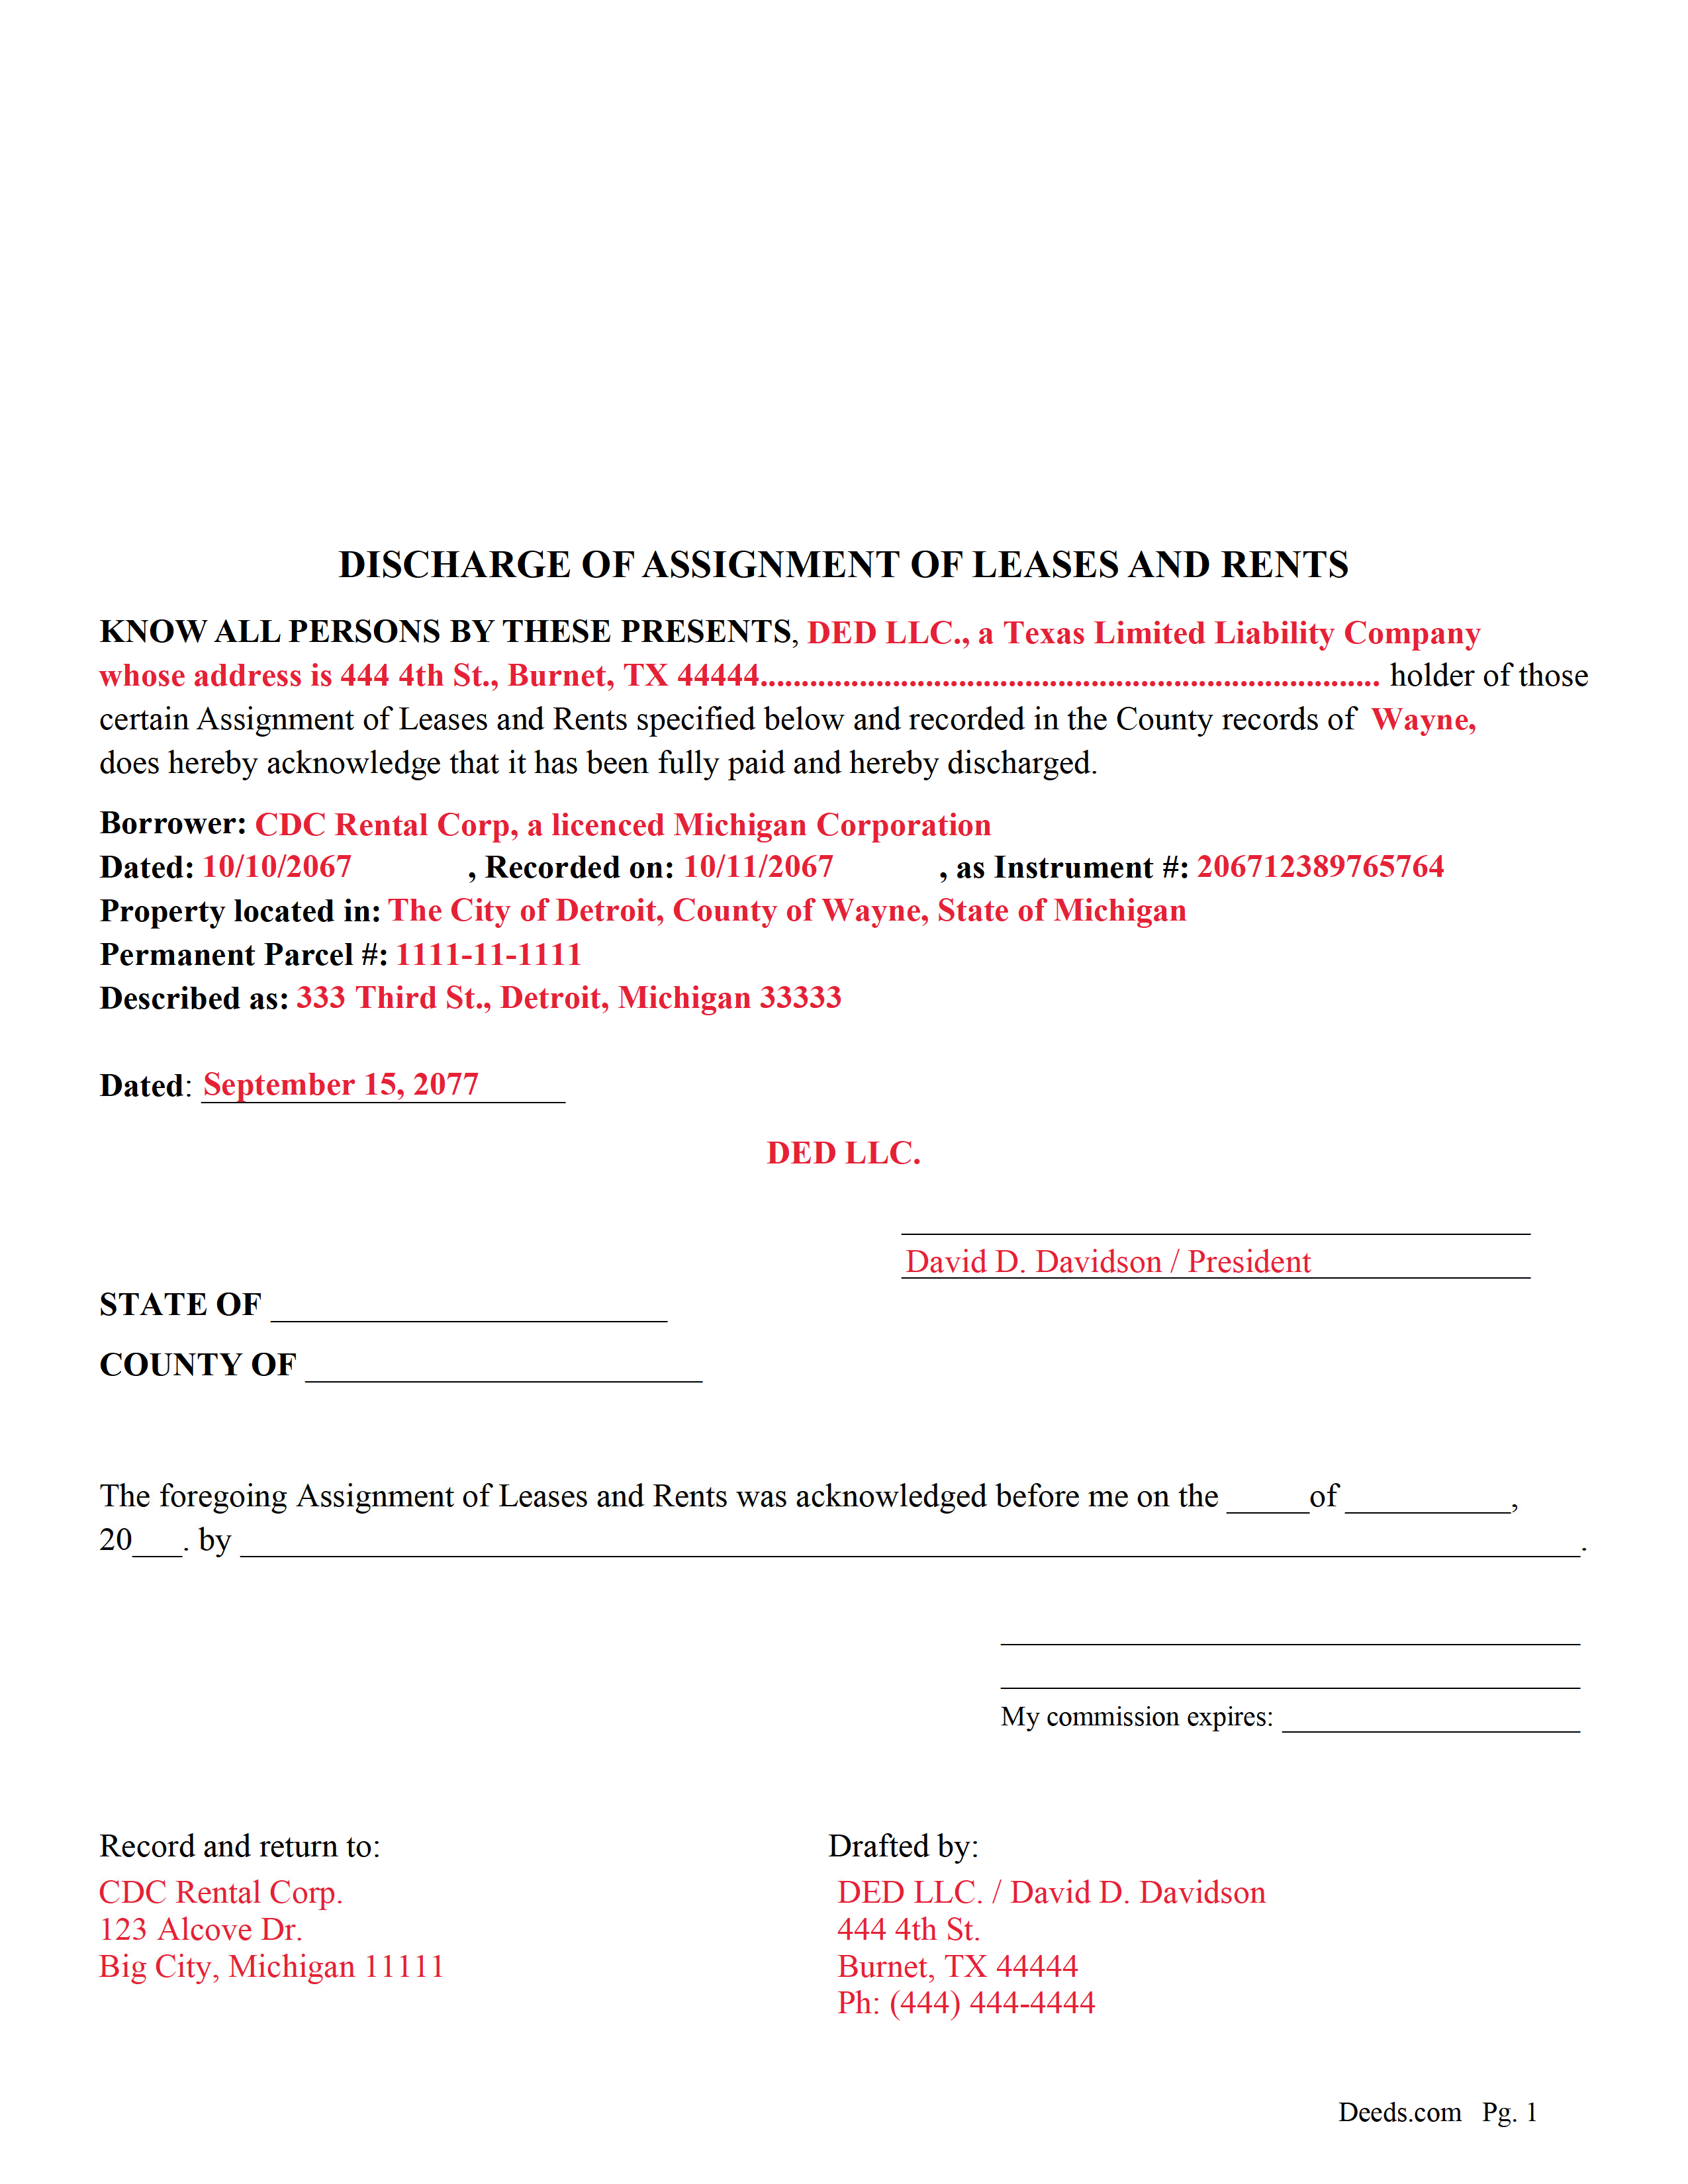 Completed Example of the Discharge of Assignment of Leases and Rents document